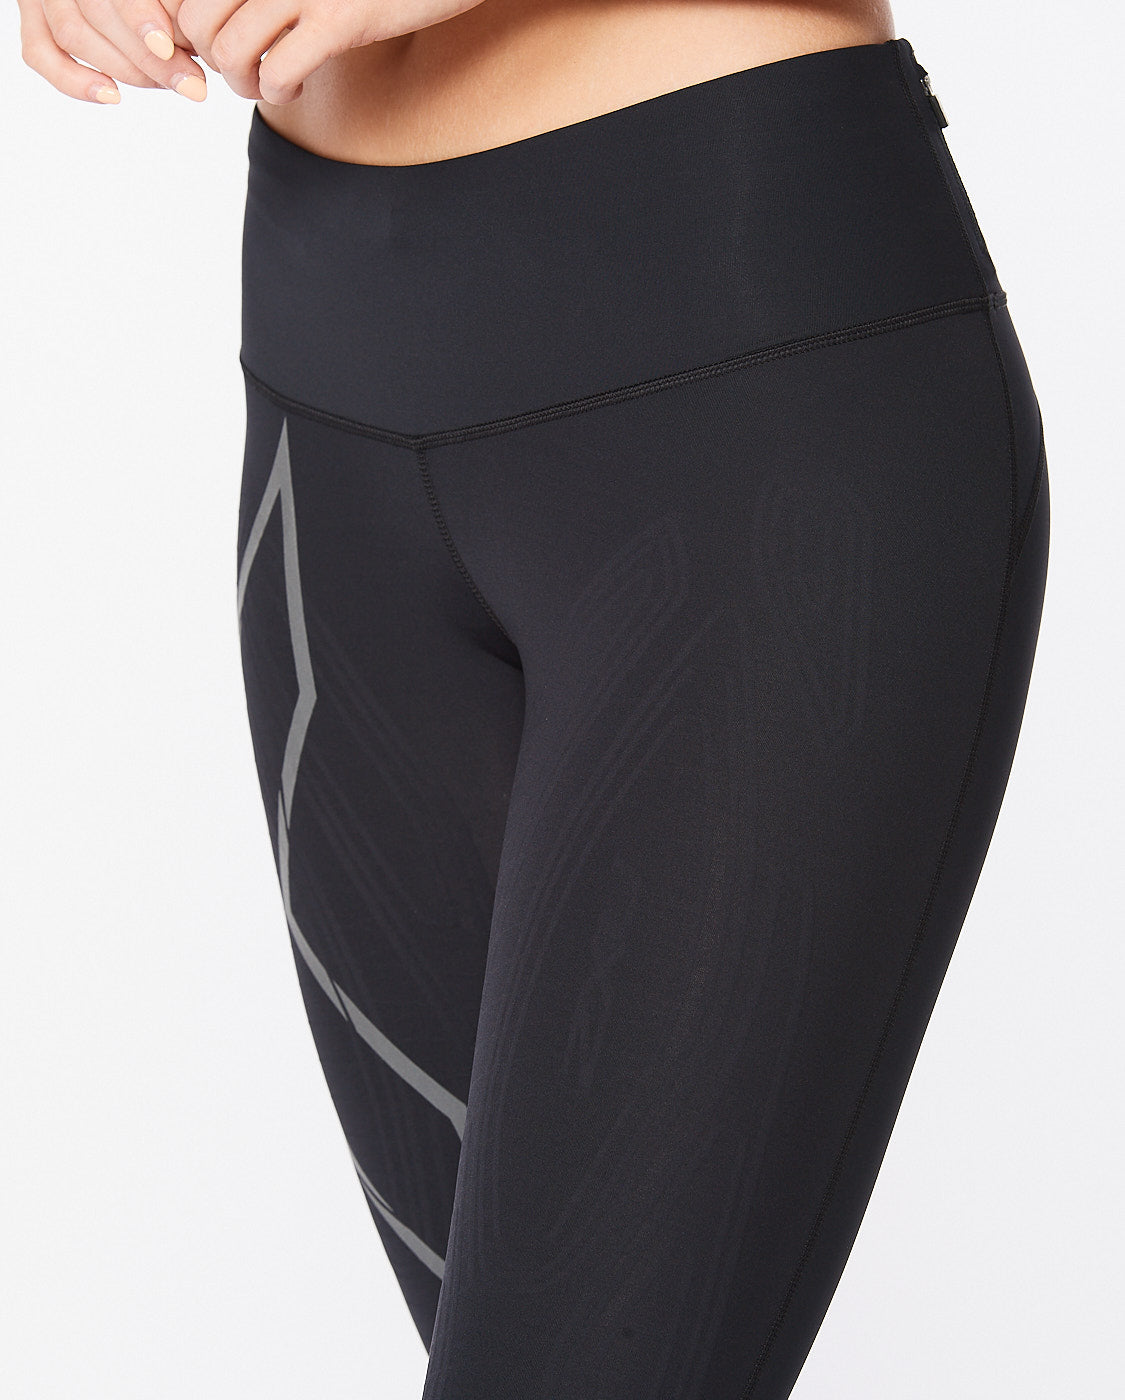 Motion Low Impact Leggings - XS in 2023  Compression fabric, Form fitting,  Leggings